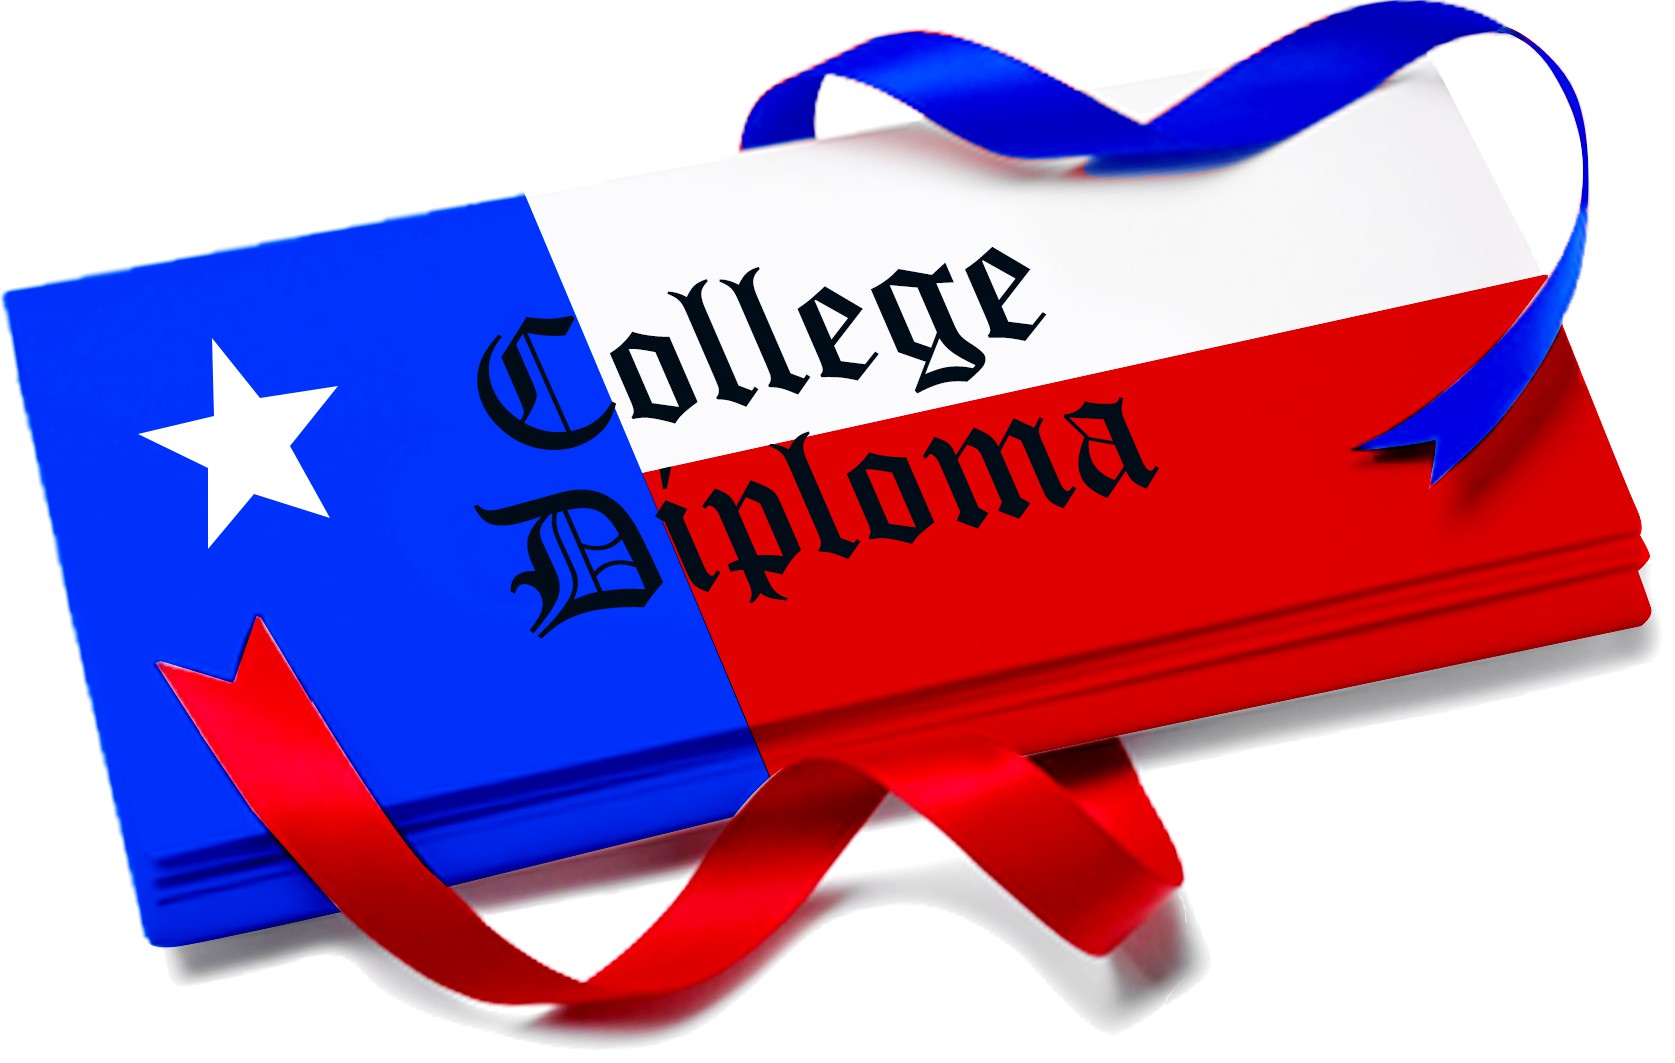 The University of Texas at Brownsville College Diploma